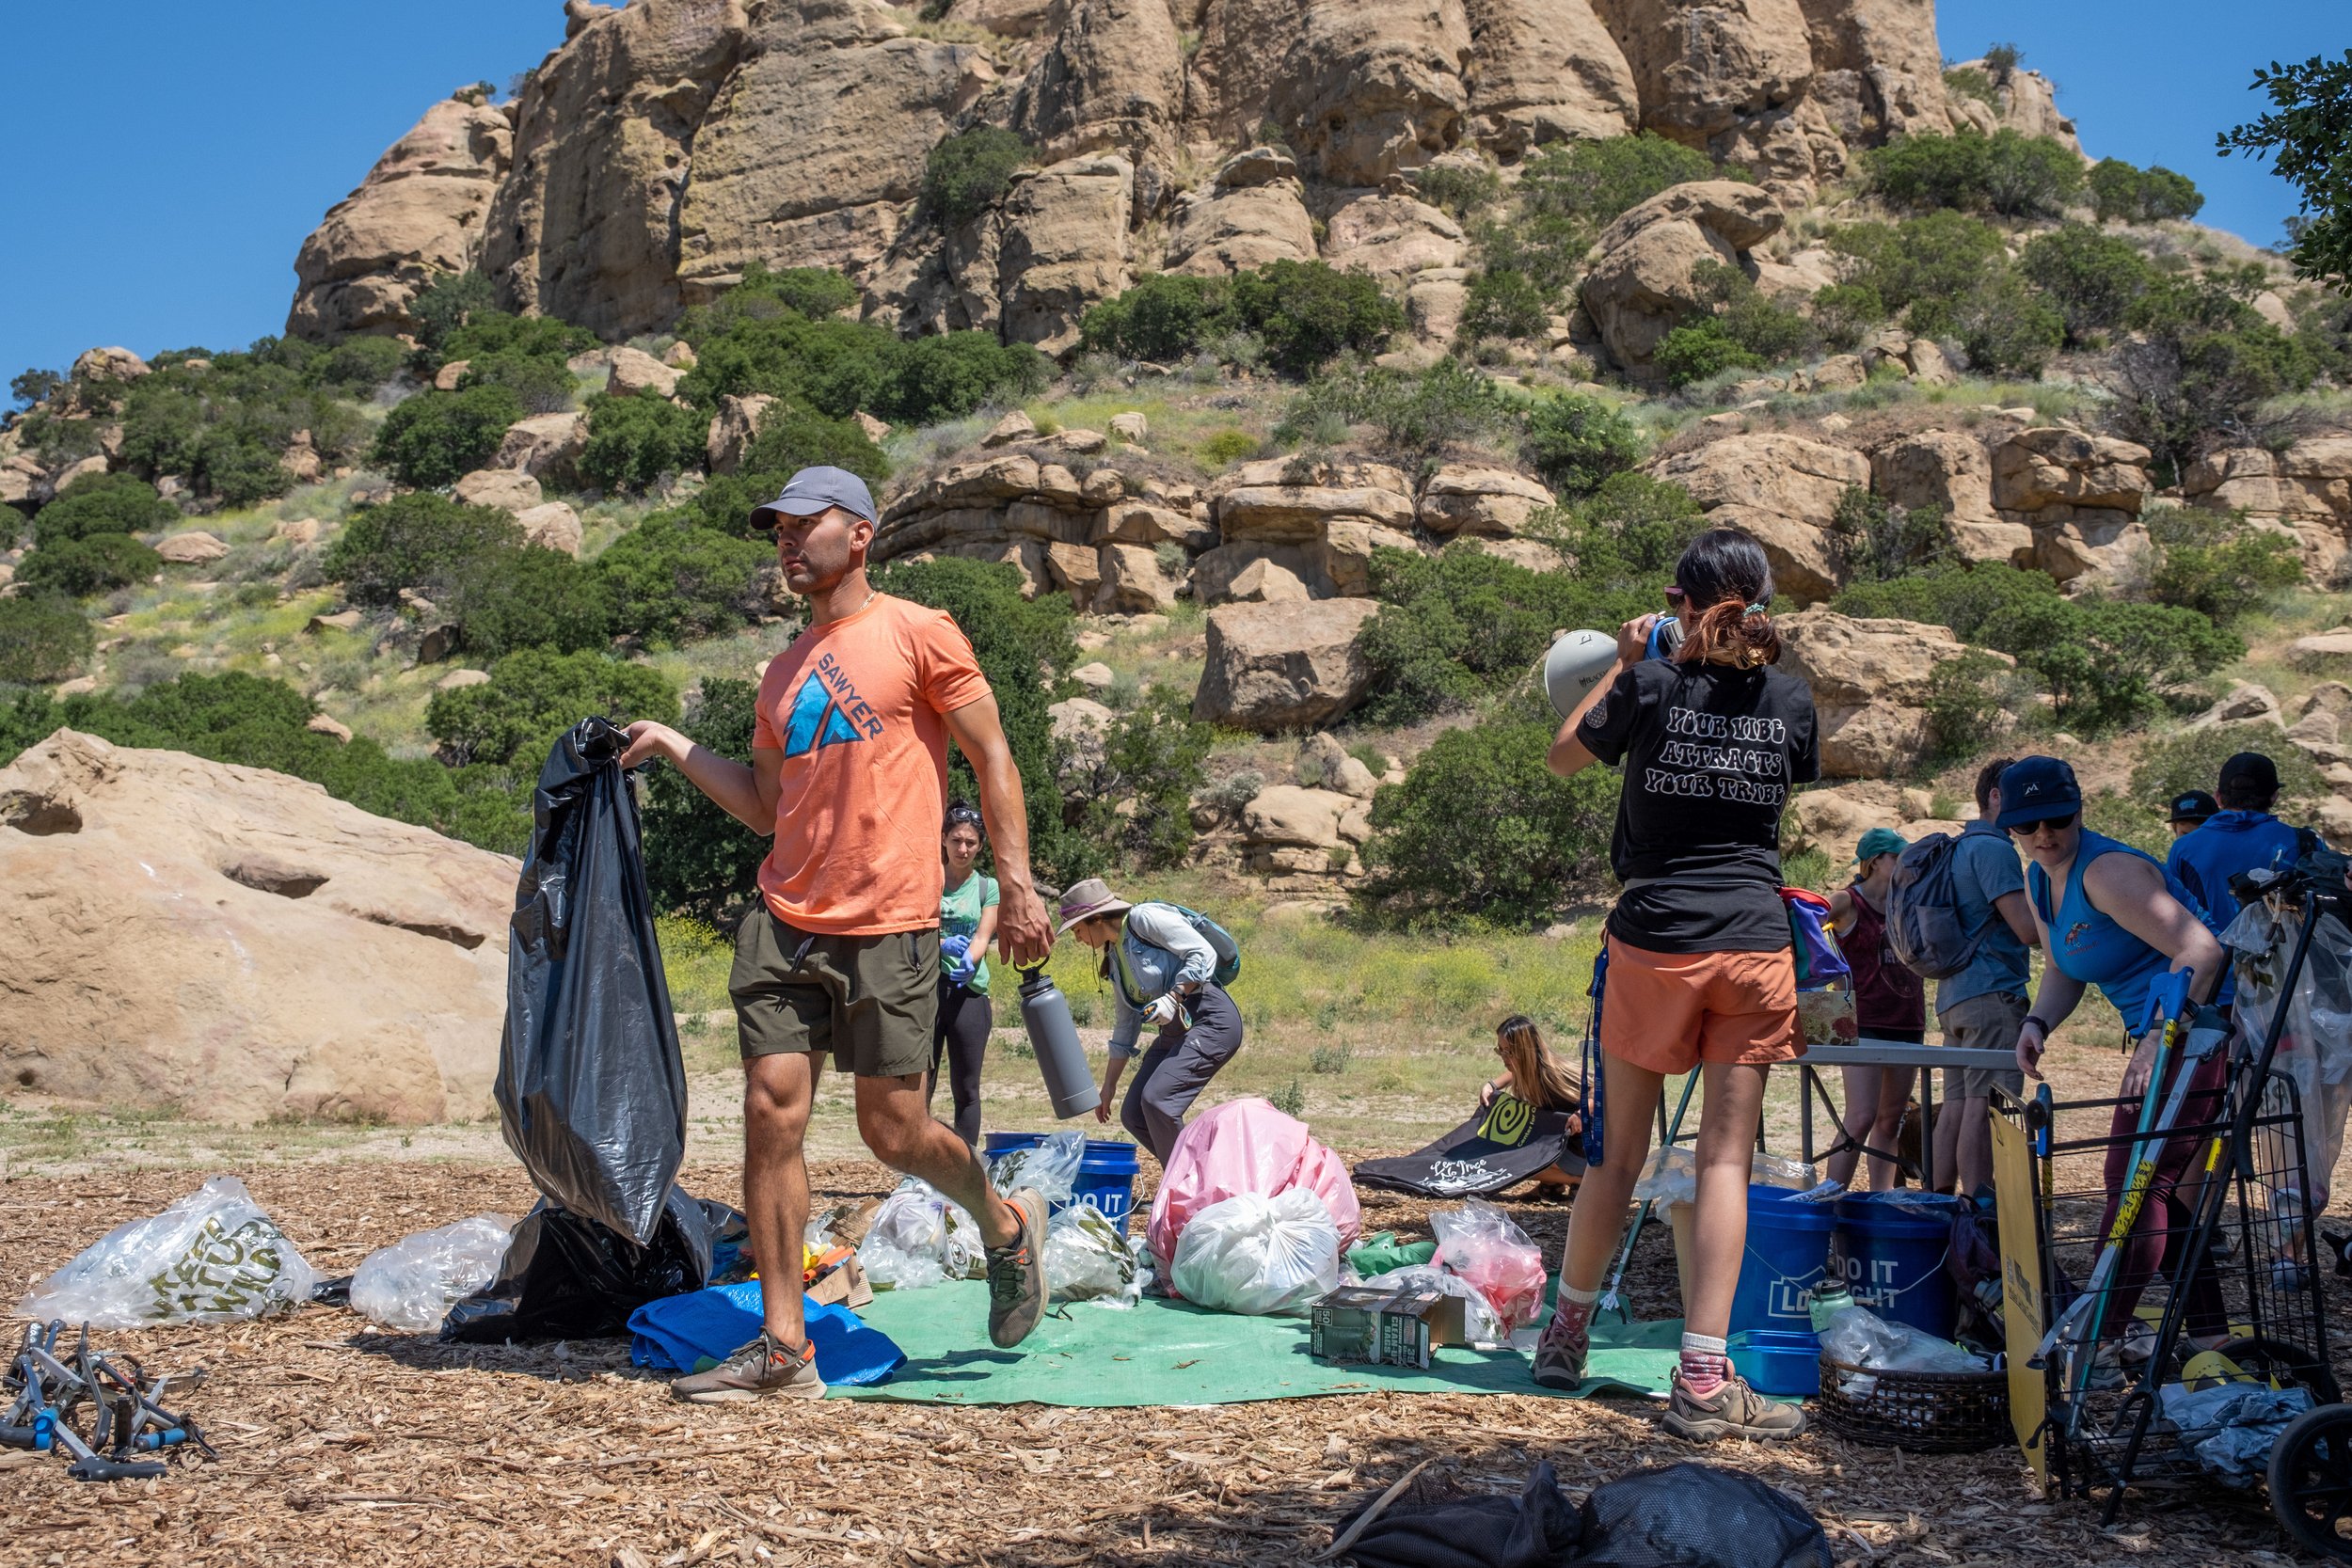  Attendees carry the bags up to the sign, where Waste Management has been ordered to pick up the collection of trash. Stoney Point Park in Chatsworth, Los Angeles, California on Saturday, April 9, 2022. (Anna Sophia Moltke | The Corsair) 